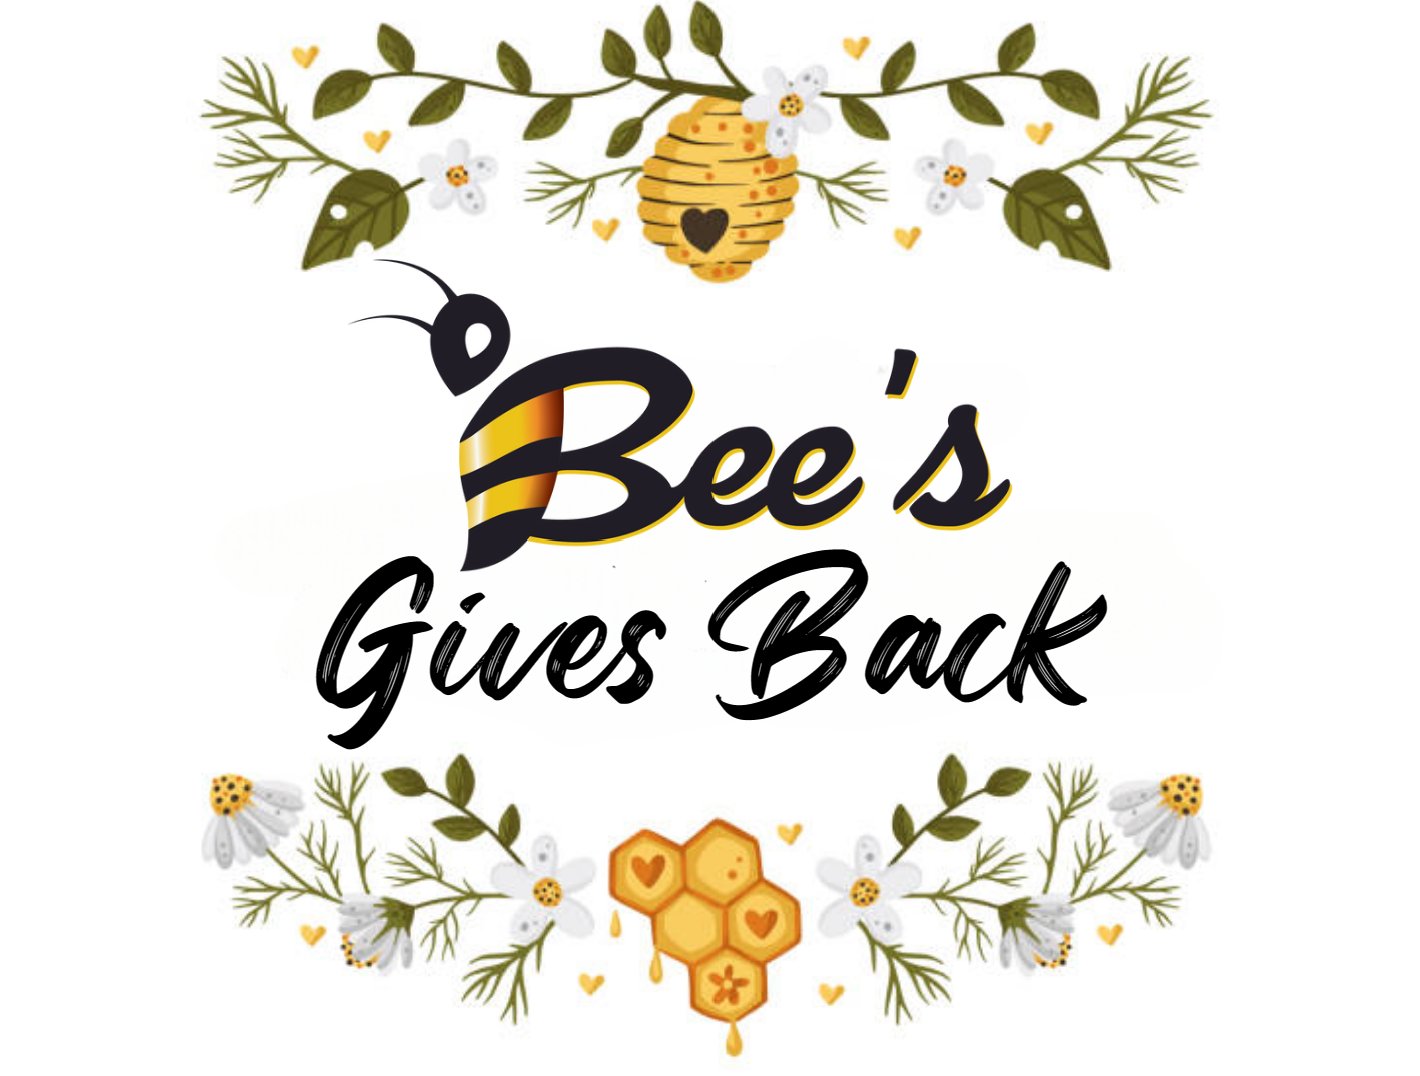 Bee's Gives Back